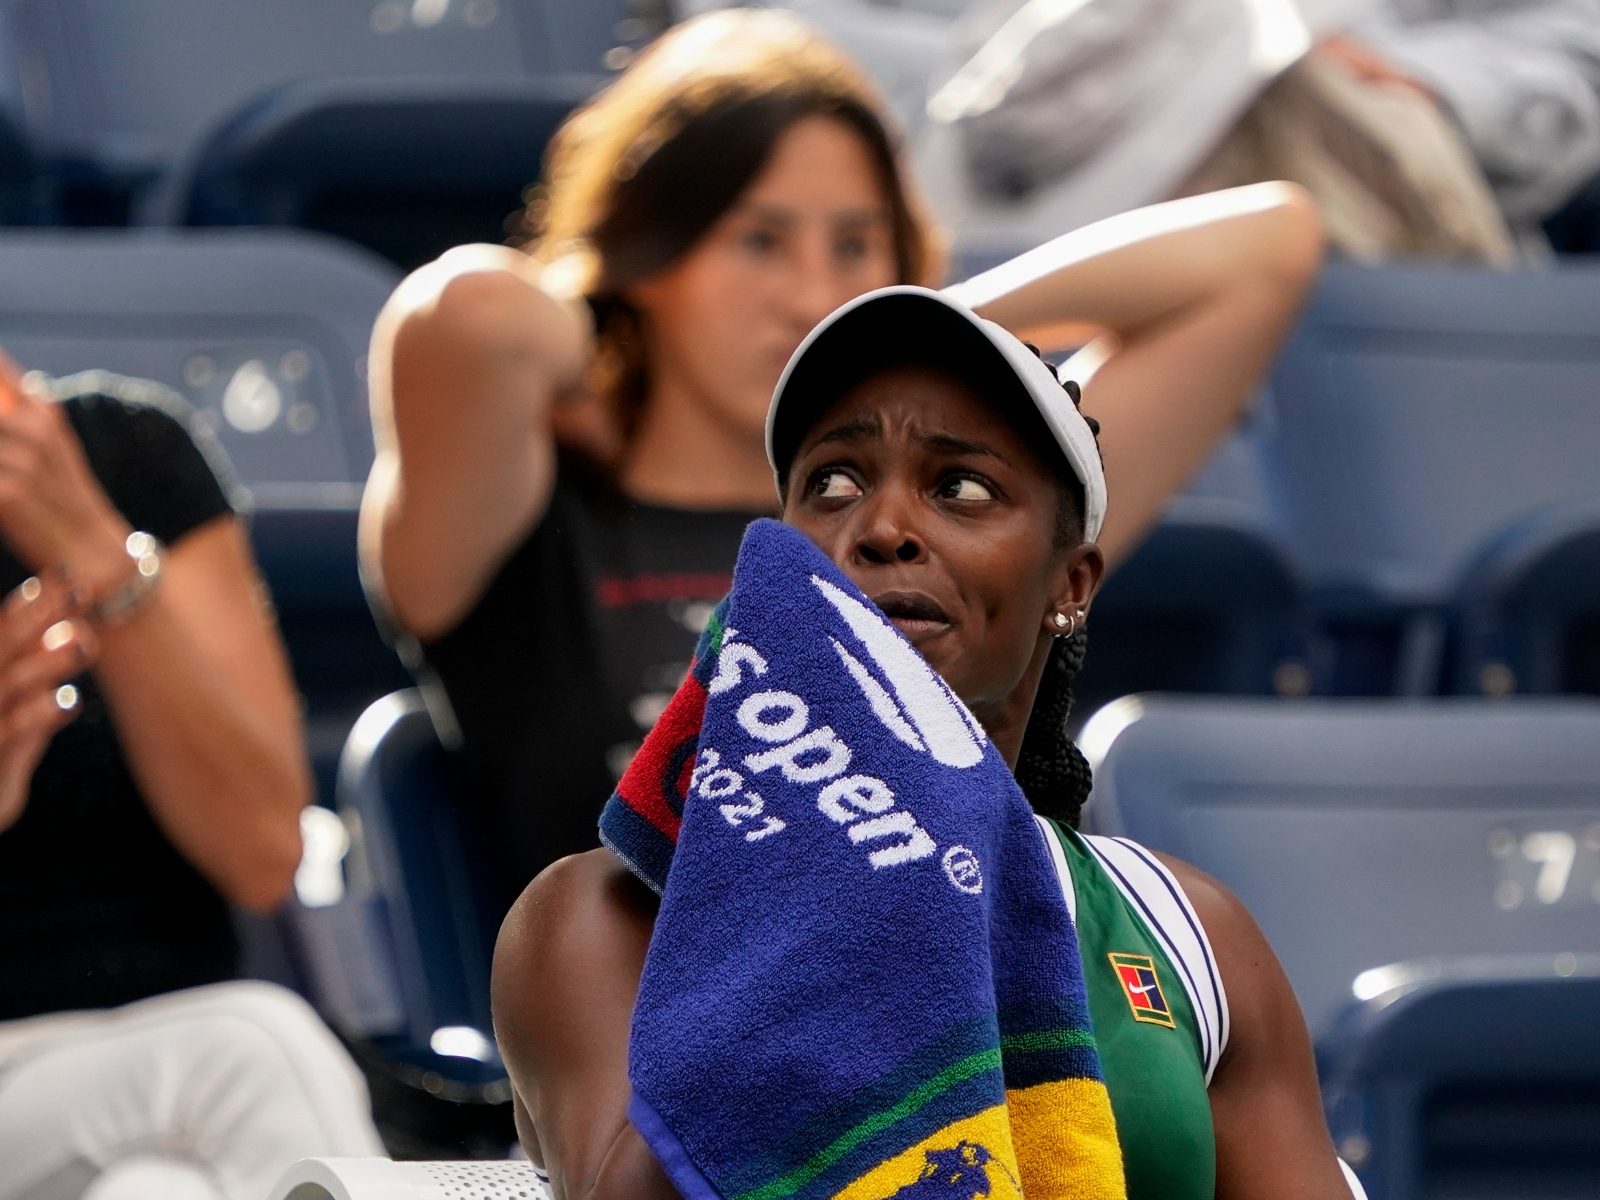 Ex-US Open Champion Sloane Stephens Shares Abusive Social Media Posts Sent to Her